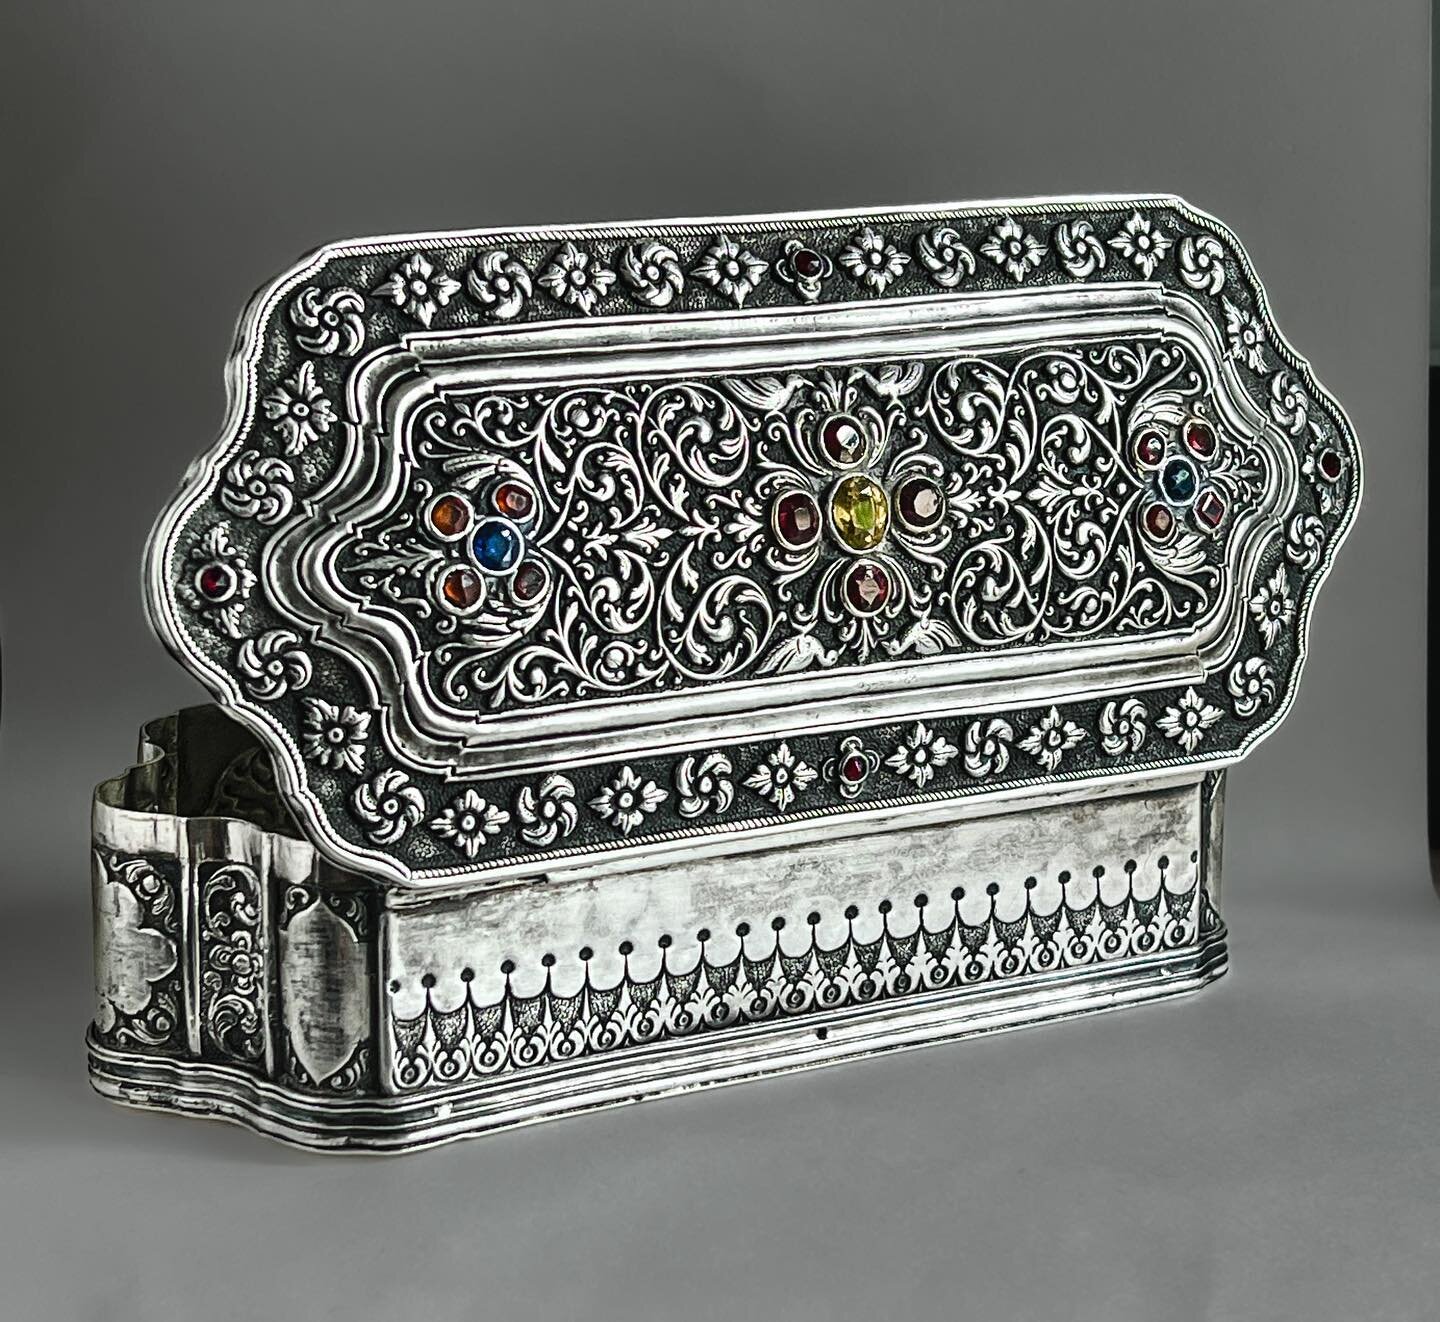 Available. An exceptionally fine silver jewelry box set with nineteen natural gemstones including sapphires and garnets. Kandy, Sri Lanka. Late 19th century. #antiquesilver #srrlanka #silverbox #antiquesilverbox #asiansilver #asianantiques #antiquebo